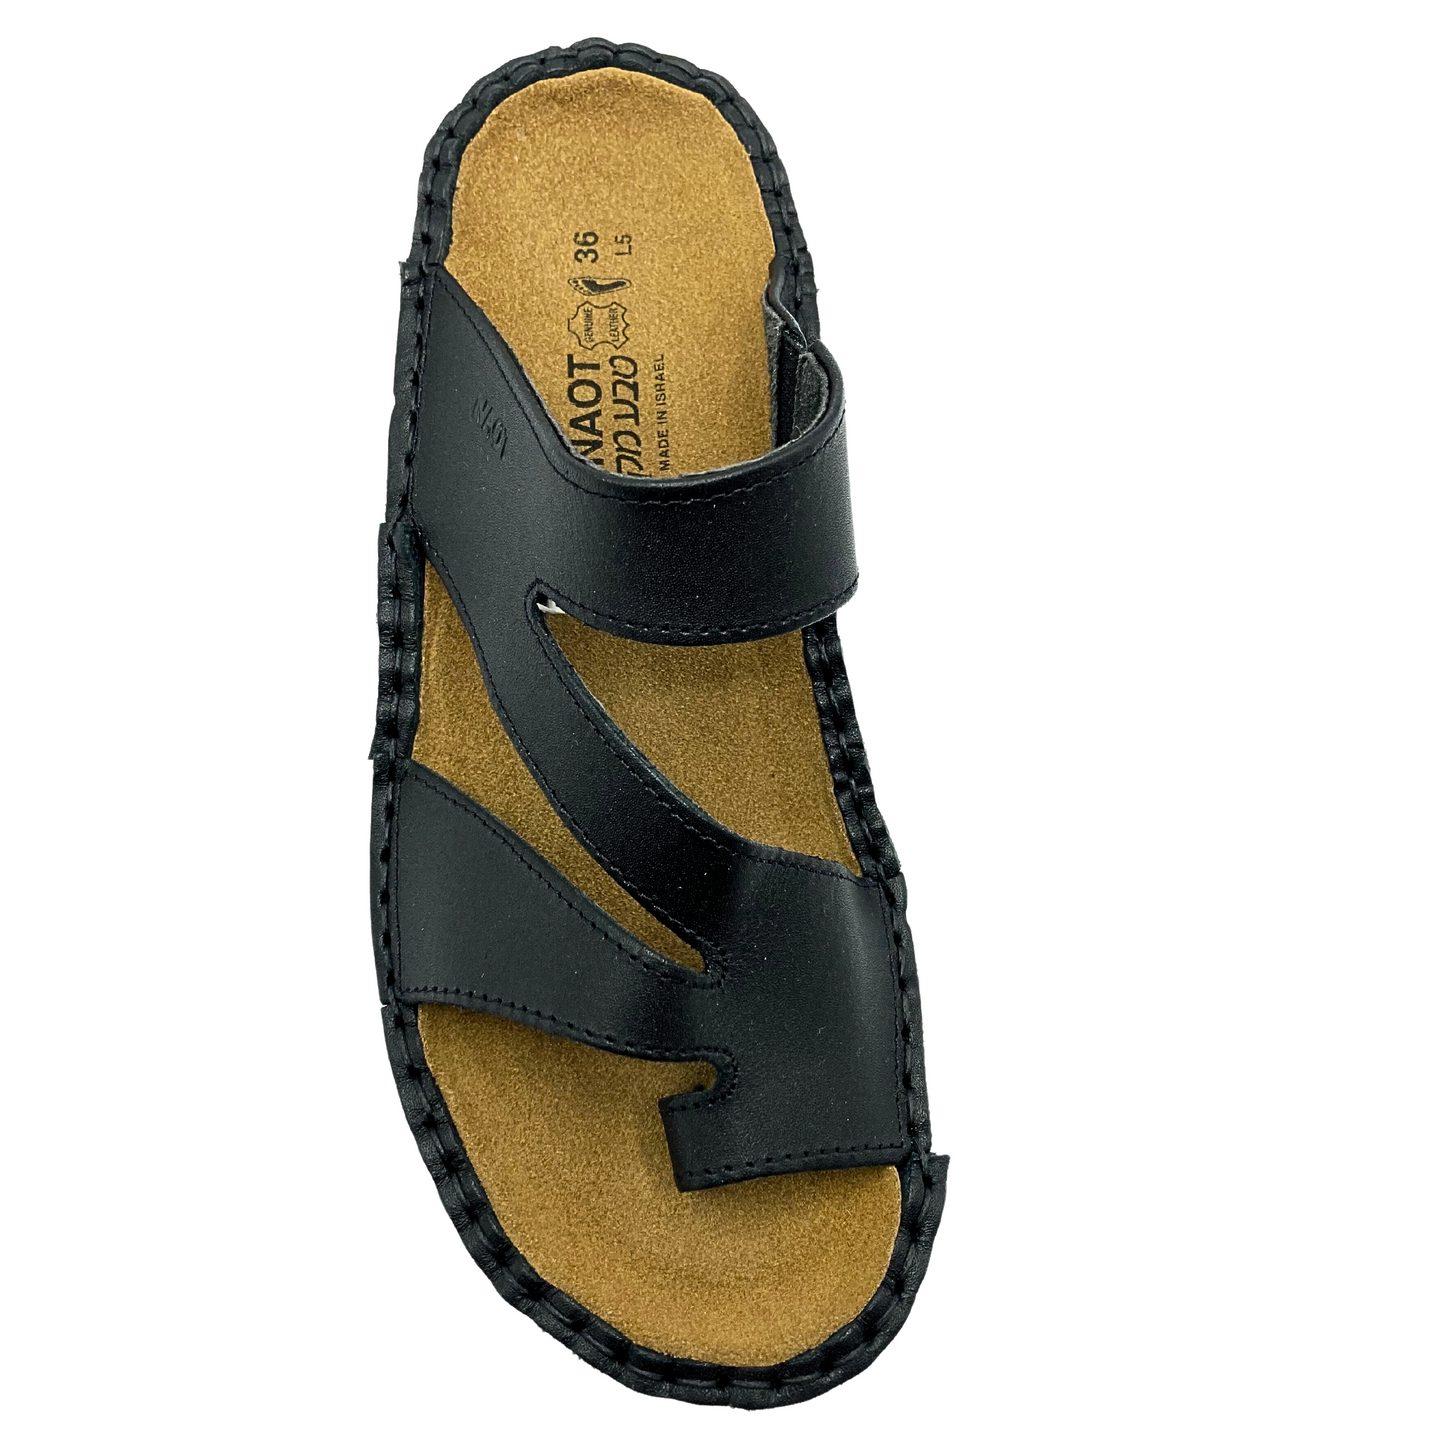 Top down view of ladies walking sandal.  Leather insole and upper.  Slip on style with toe loop